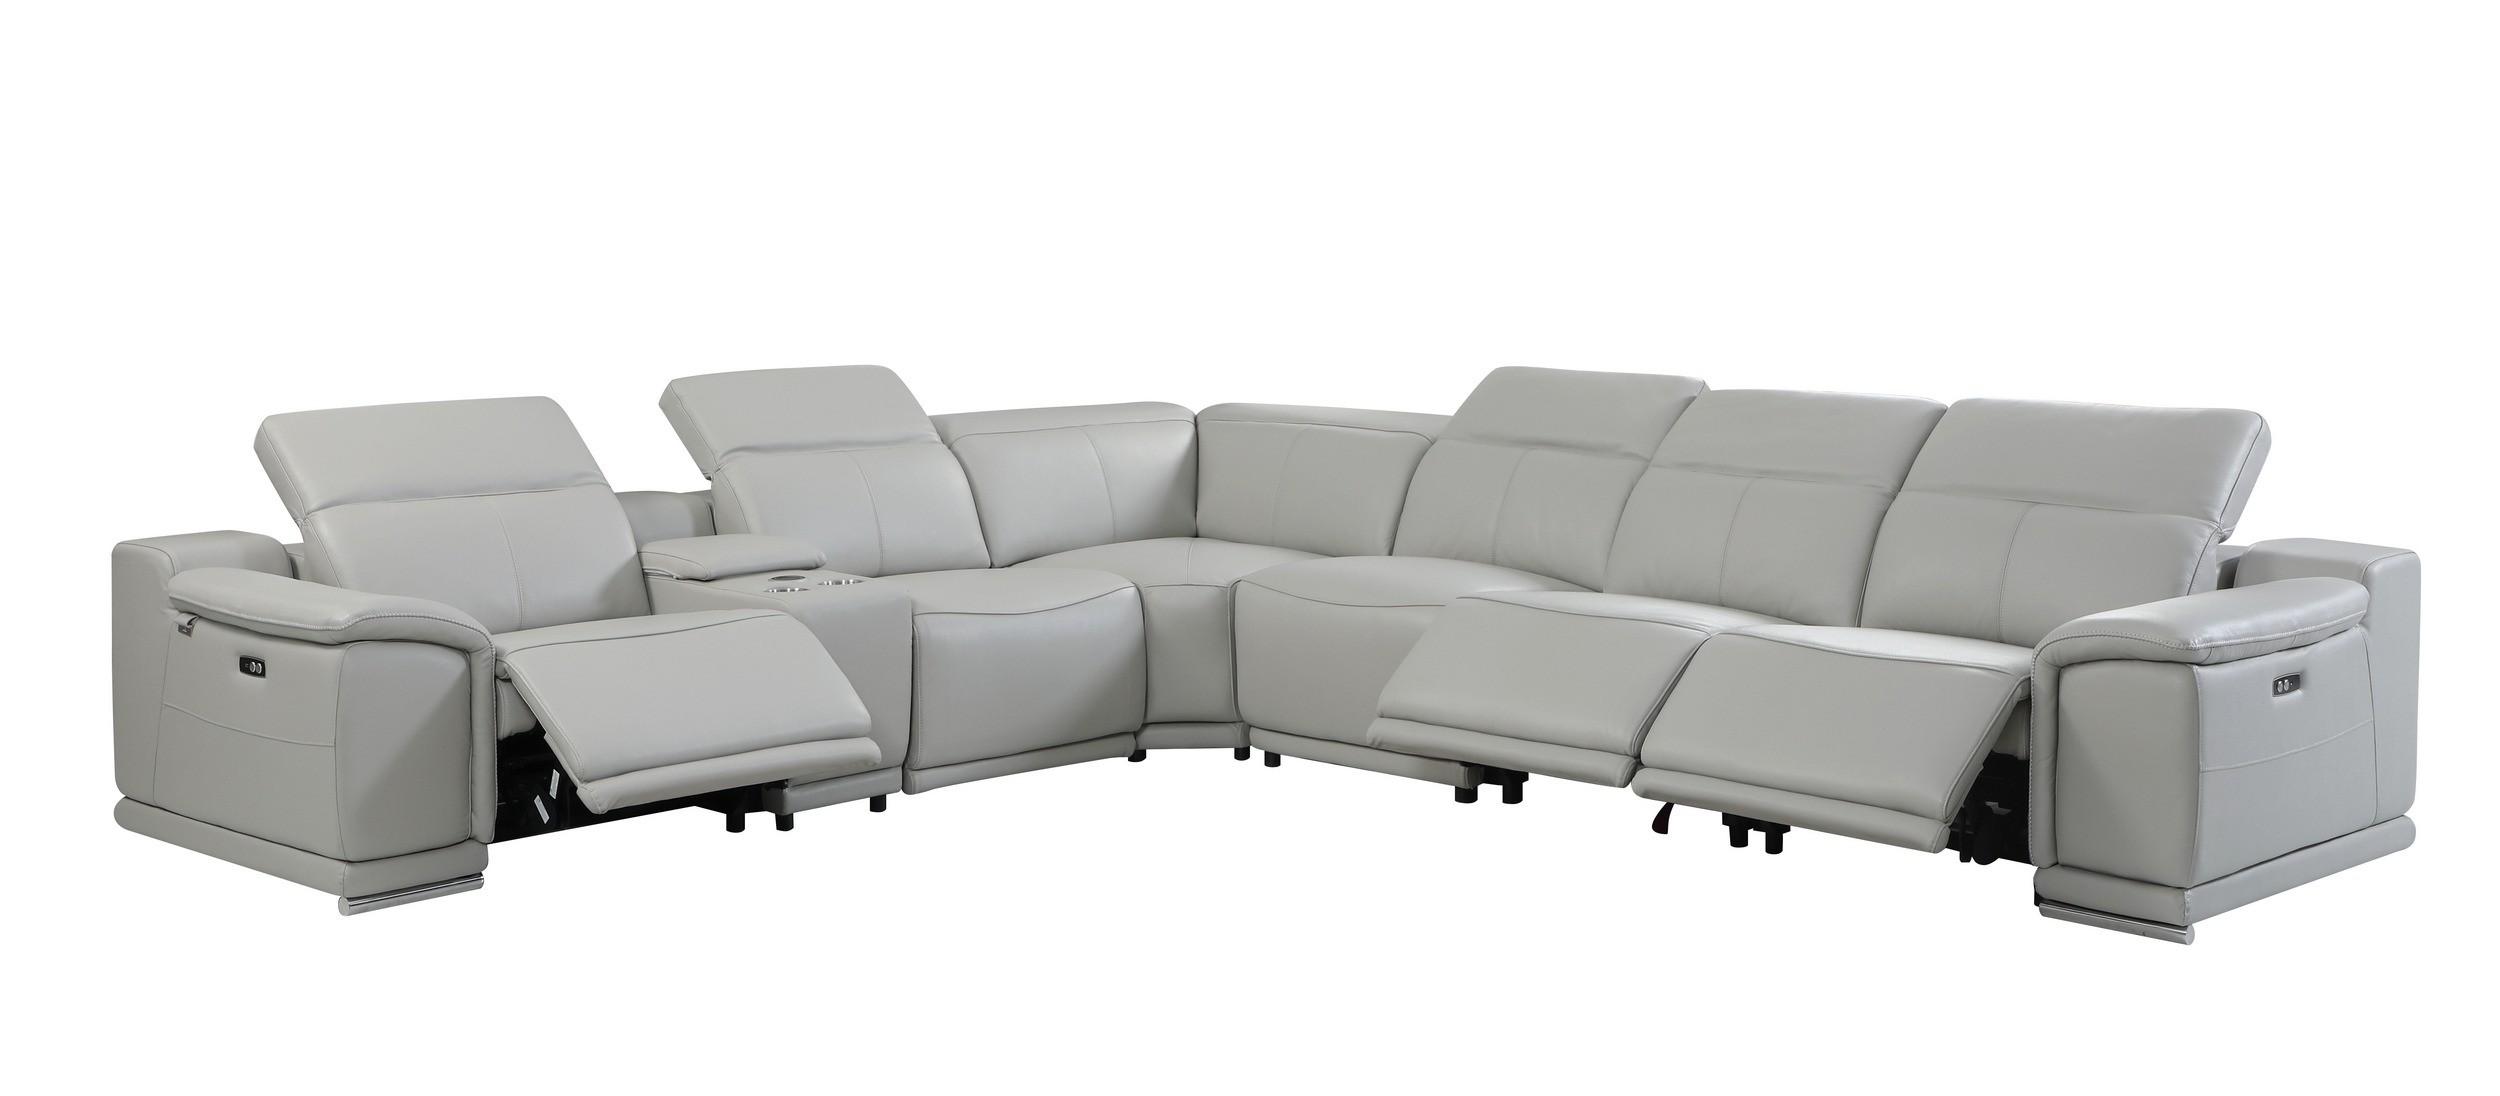 

    
LIGHT GRAY 3-Power Reclining 7PC Sectional w/ 1-Console 9762 Global United
